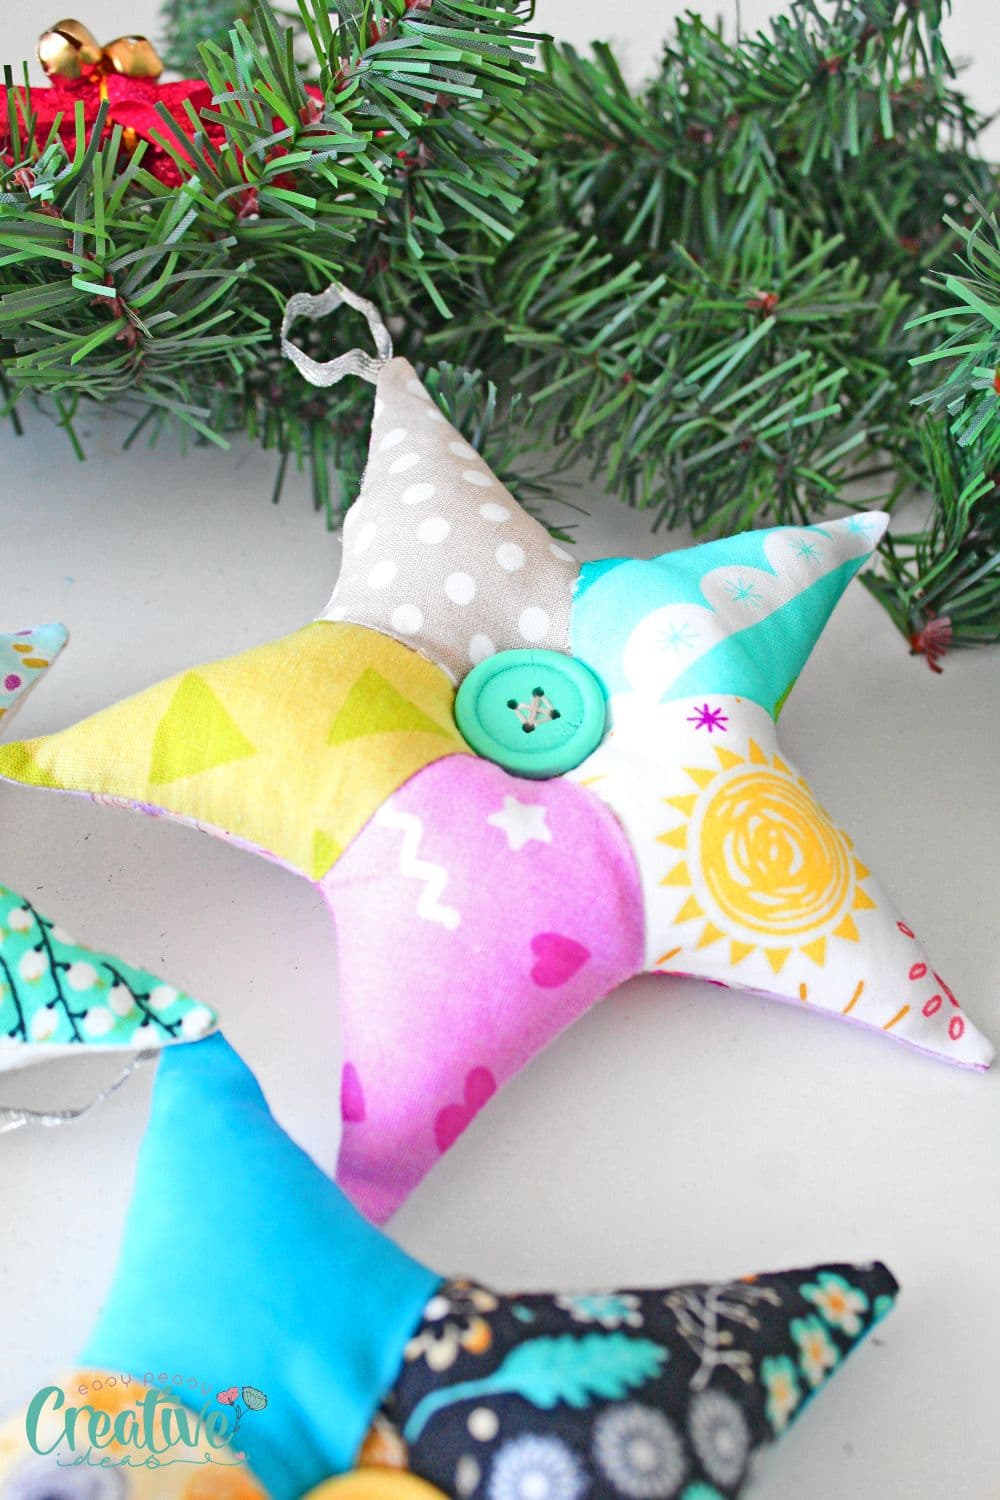 Star ornaments sewn with a patchwork technique